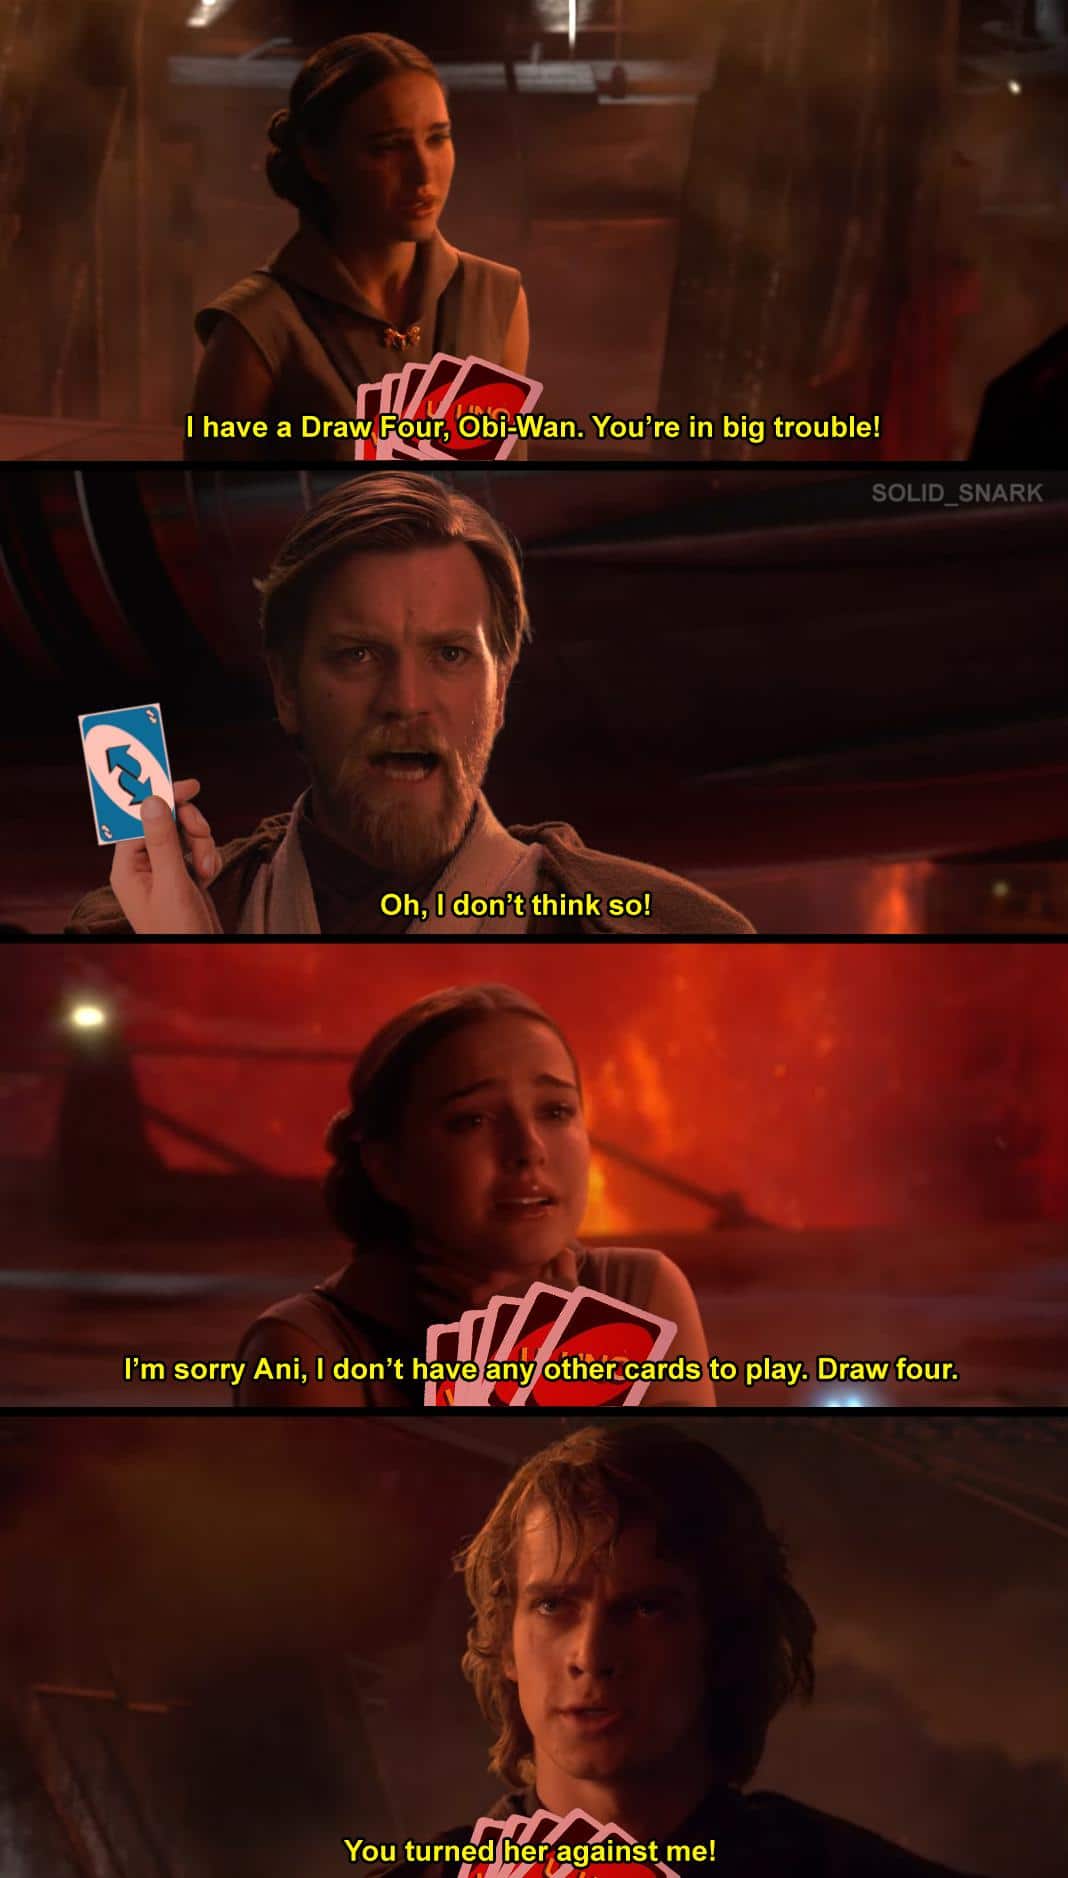 star-wars prequel-memes star-wars text: I have a Draw Four, Obi-Wan. You're in big trouble! SOLID SNARK Oh, I don't think so! I'm sorry Ani, I don't have any oihZ'ücards to play. Draw four. You turned her against me! 